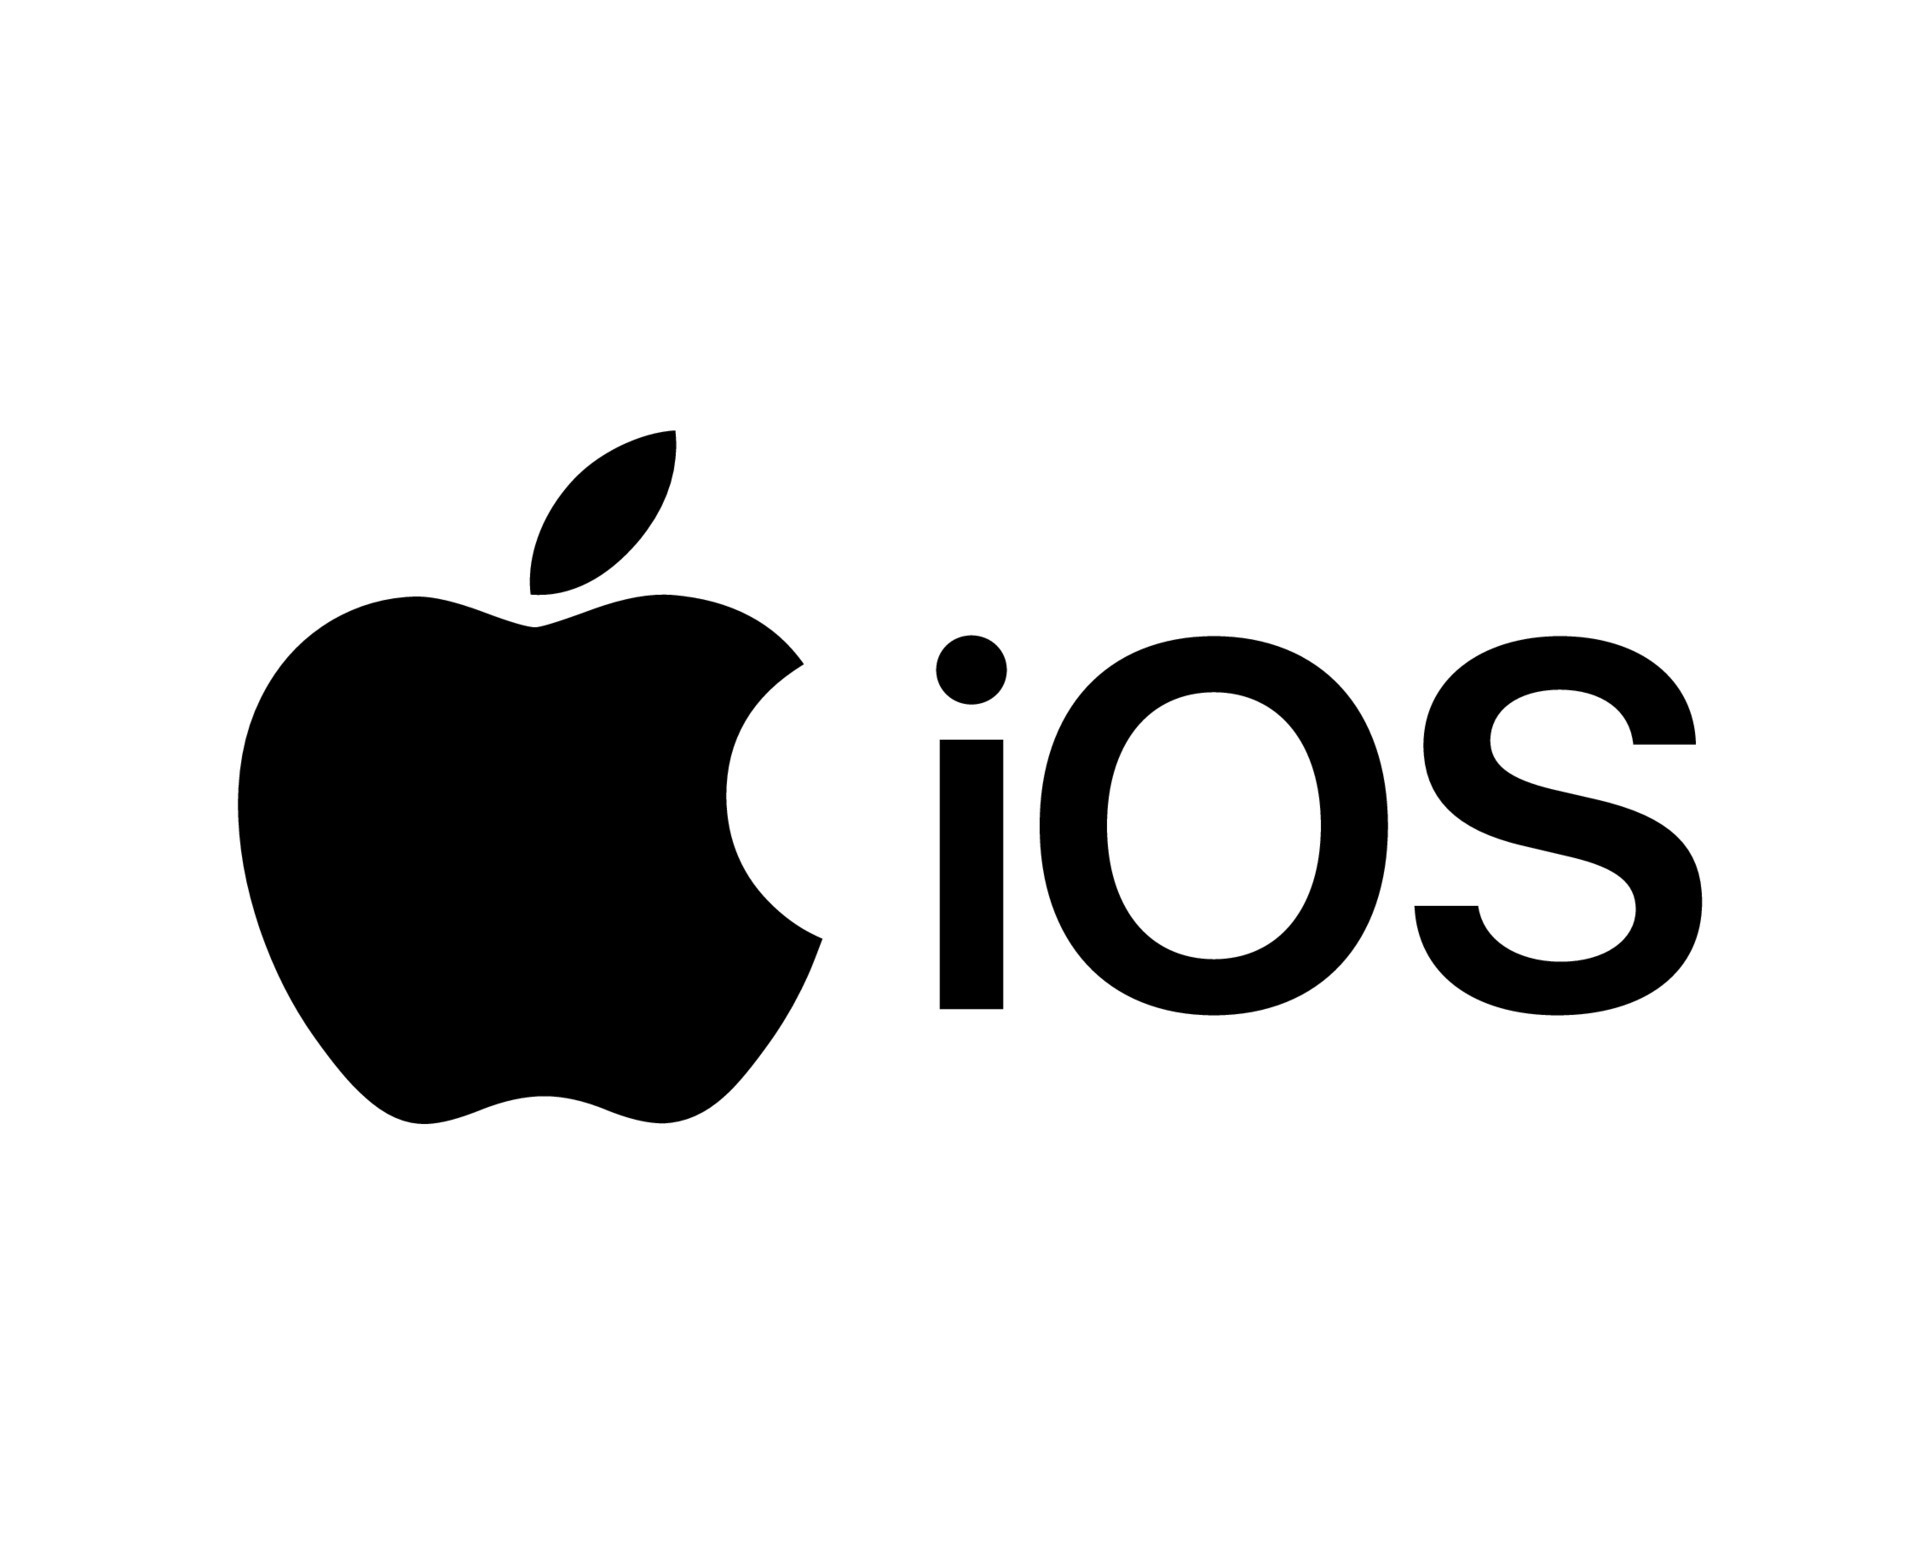 Upcoming iOS Update to Enhance iPhone Security, Increasing Resistance to Unauthorized Access.